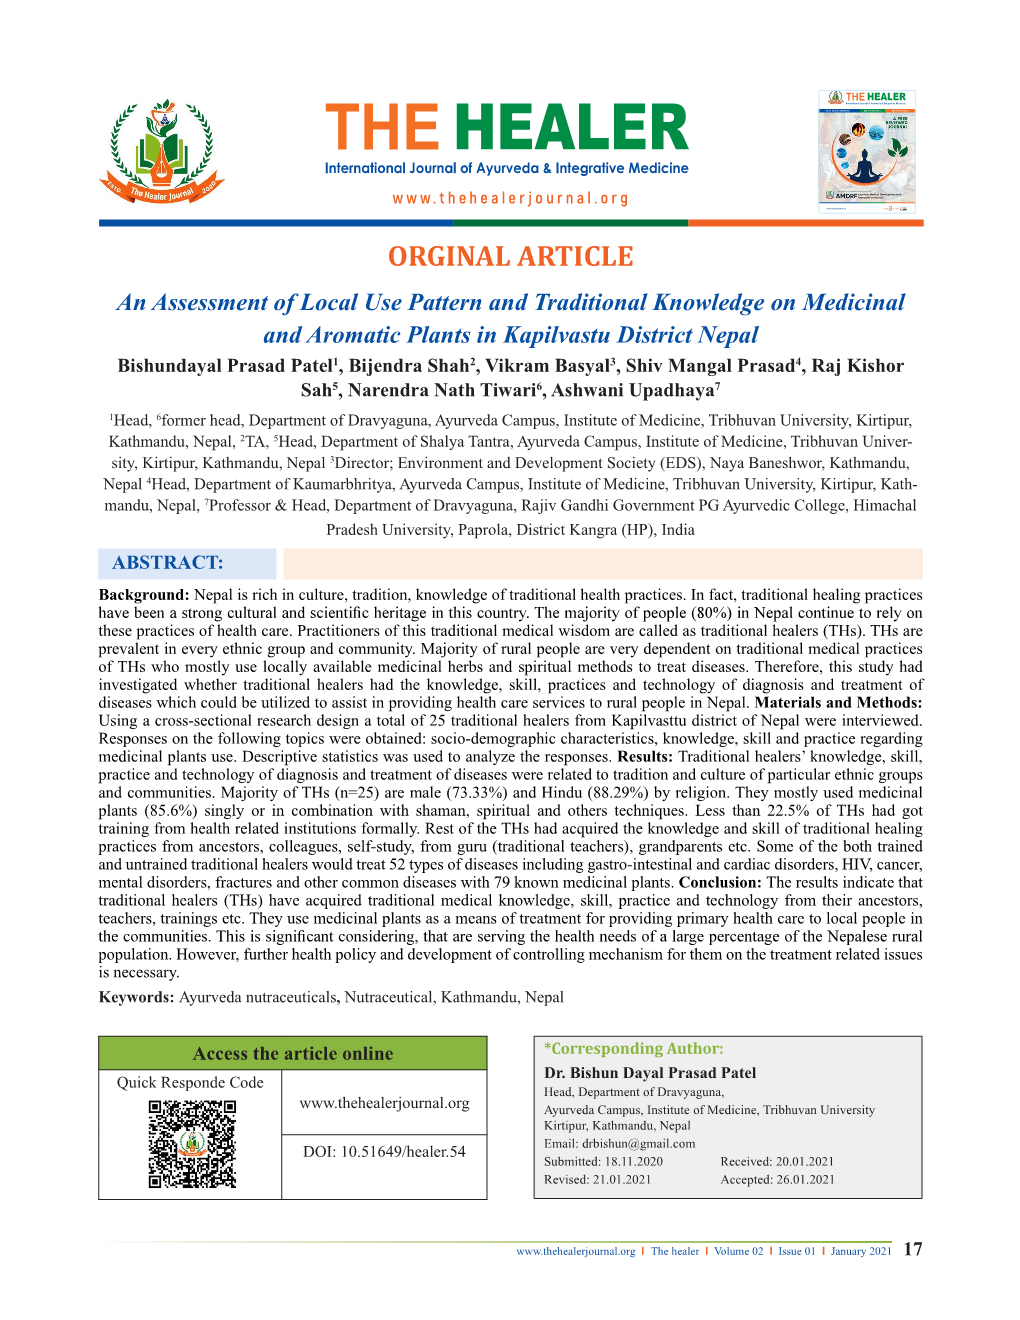 An Assessment of Local Use Pattern and Traditional Knowledge On